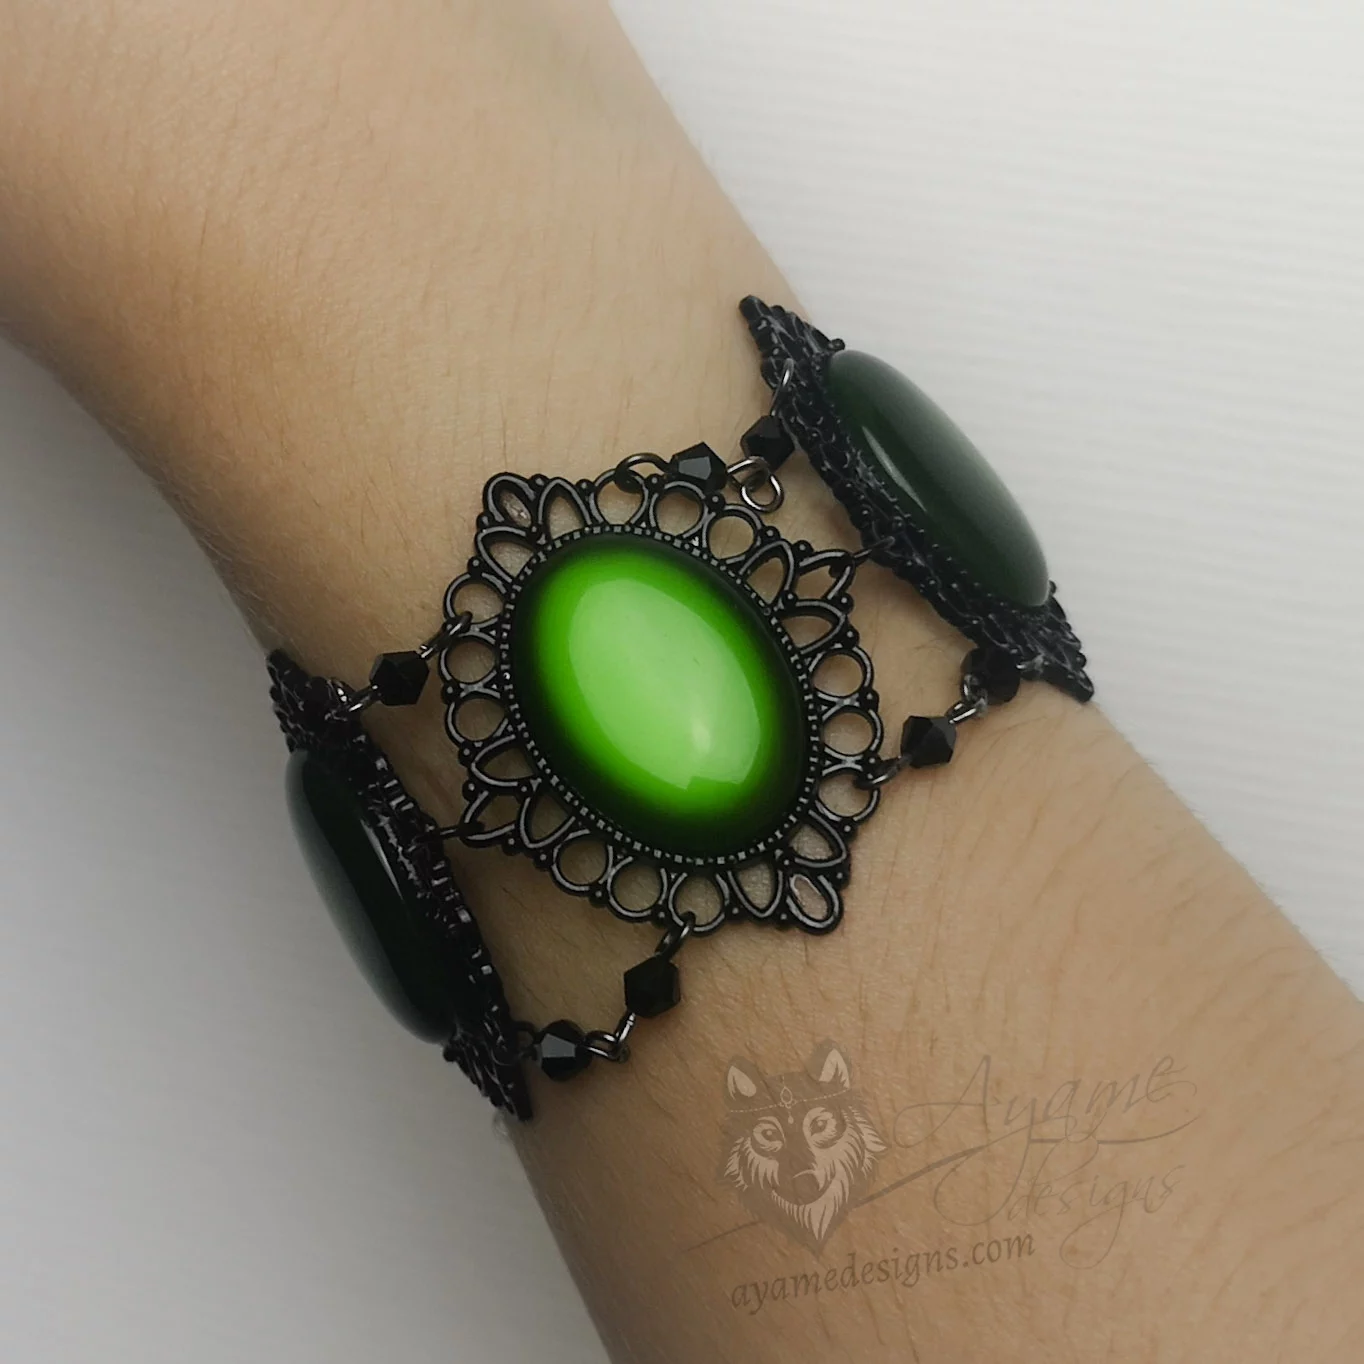 Handmade gothic bracelet with green resin cabochons in black filigree frames, and black Austrian crystal beads